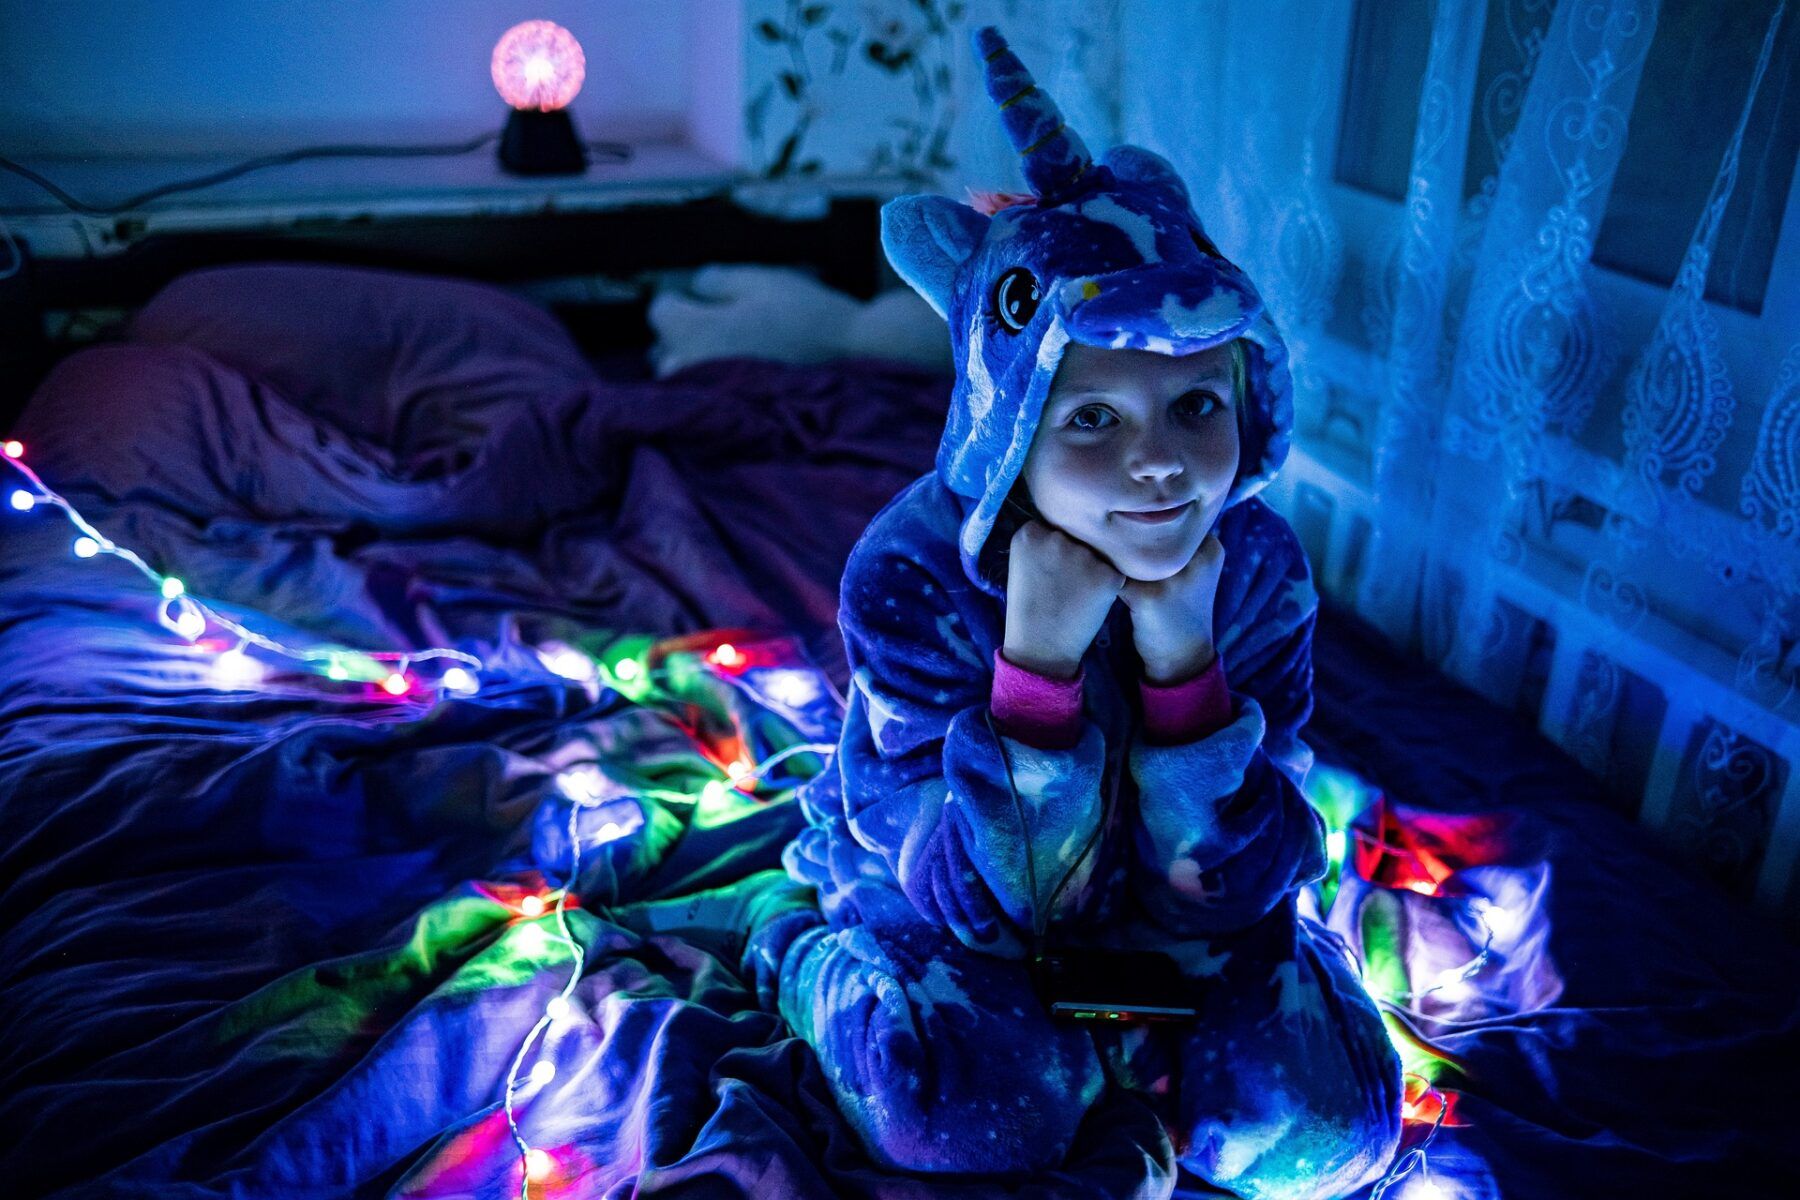 Girl sits on bed surrounded by night lights.